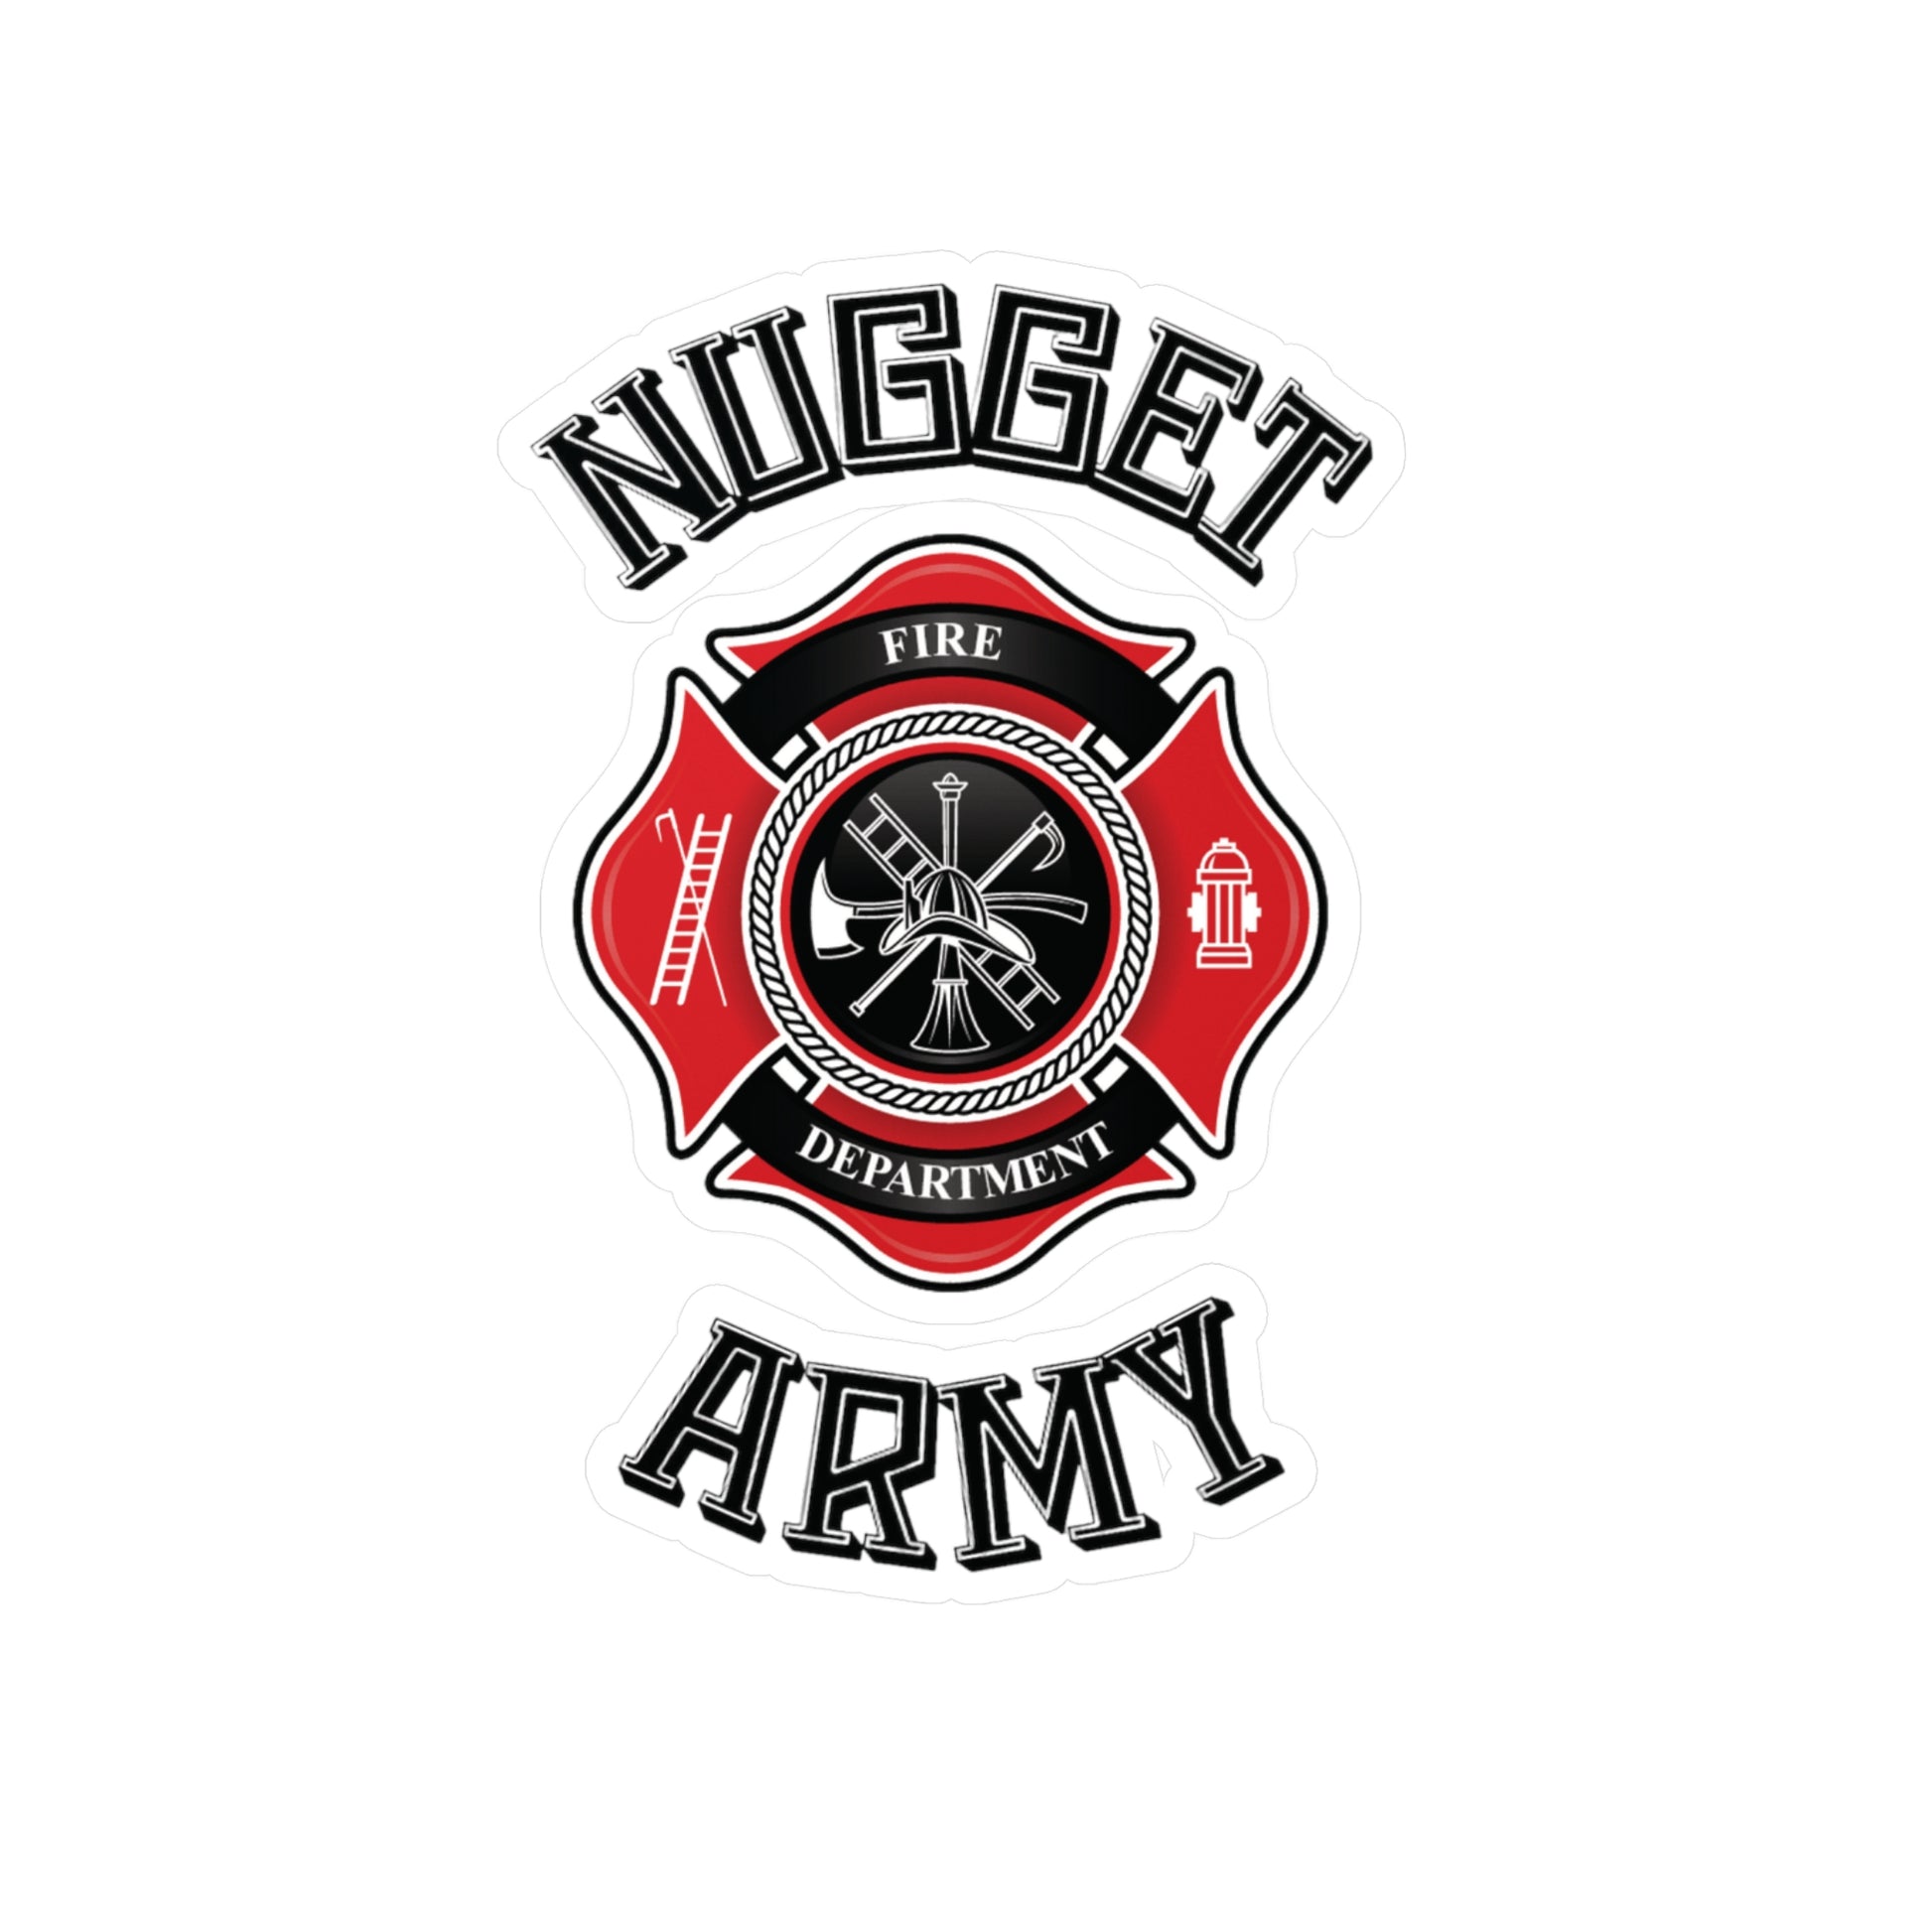 Stand out  with the  Nugget Army Fire  available at Hey Nugget. Grab yours today!